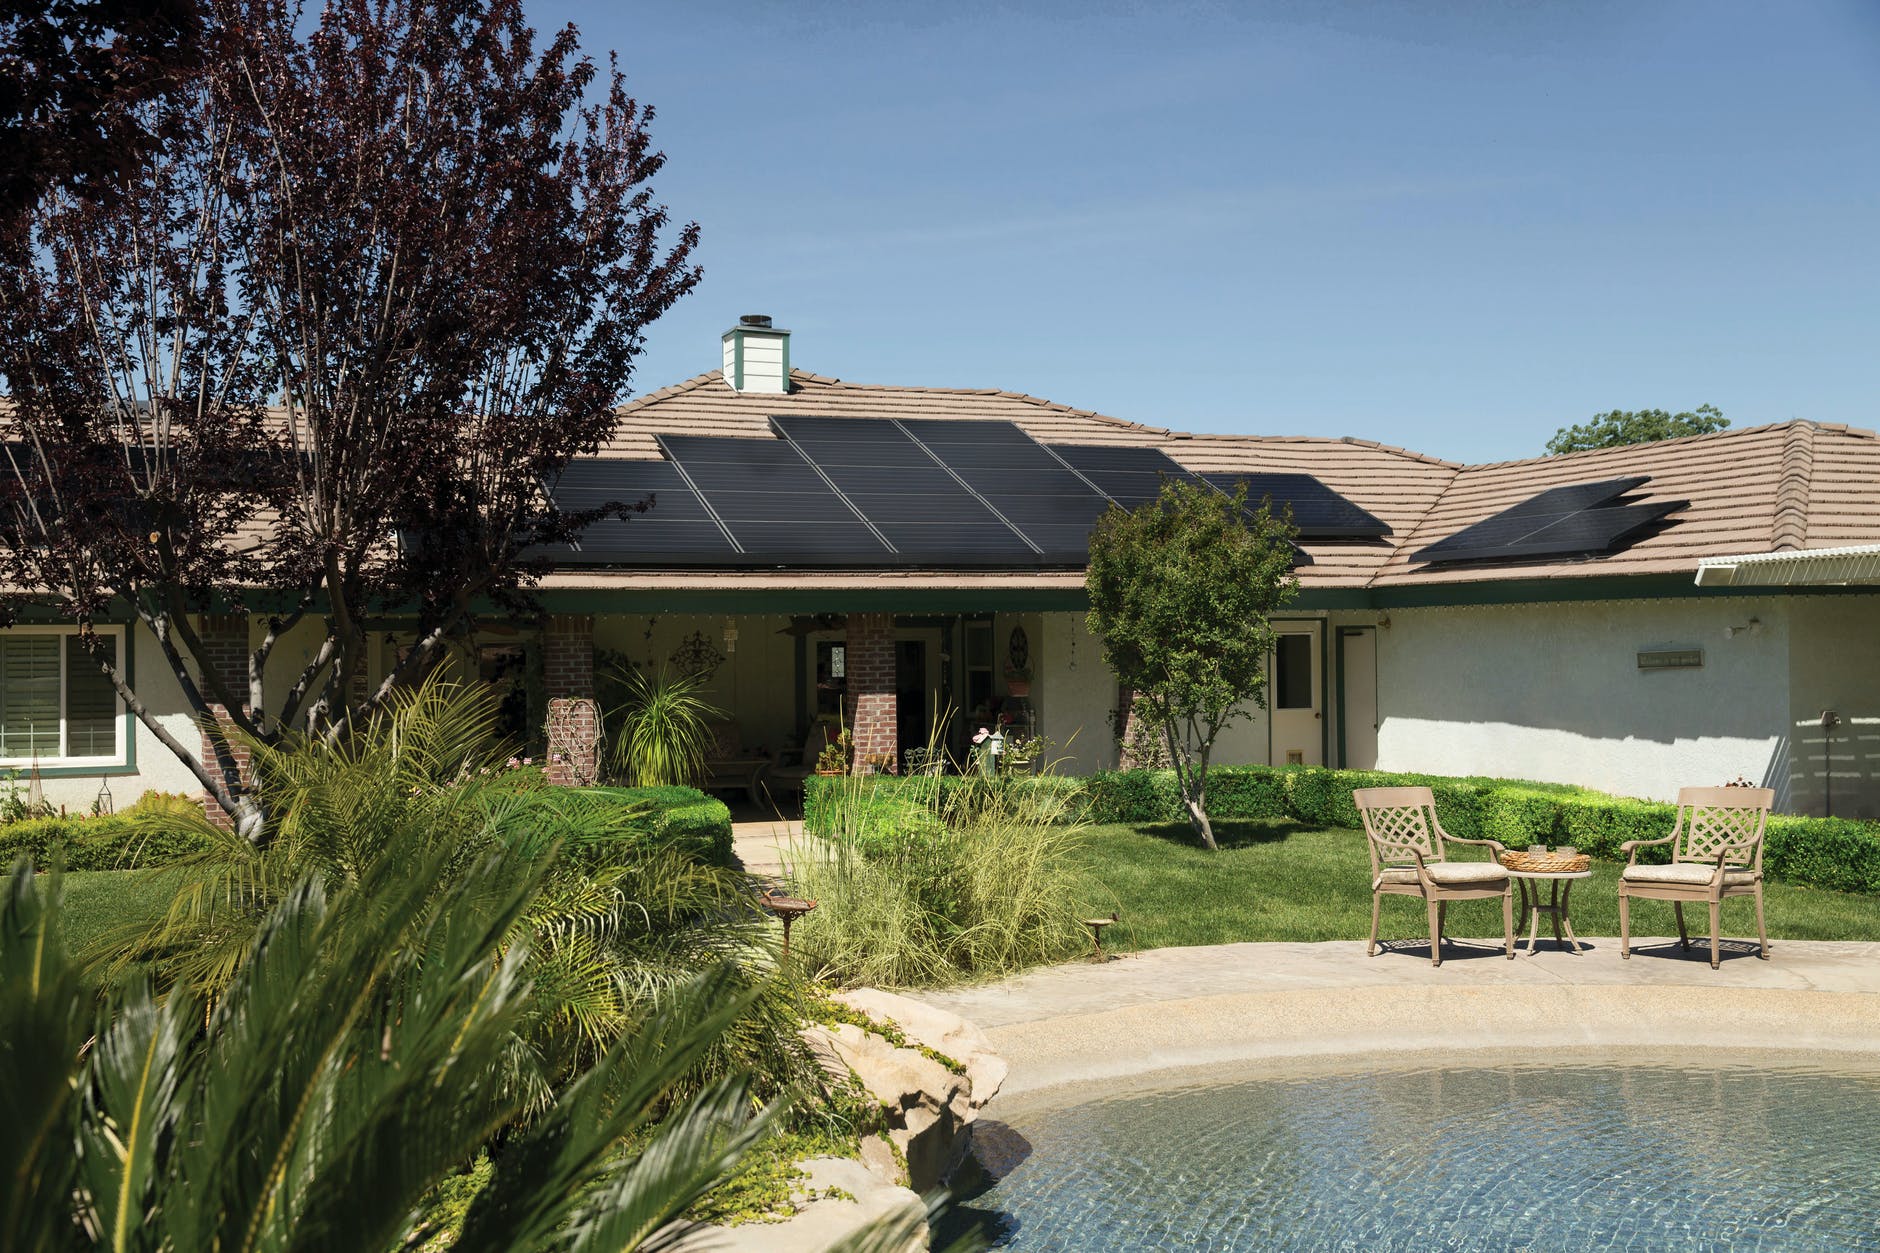 Solar Panel Lights: 6 Options For Enlightening Your Home